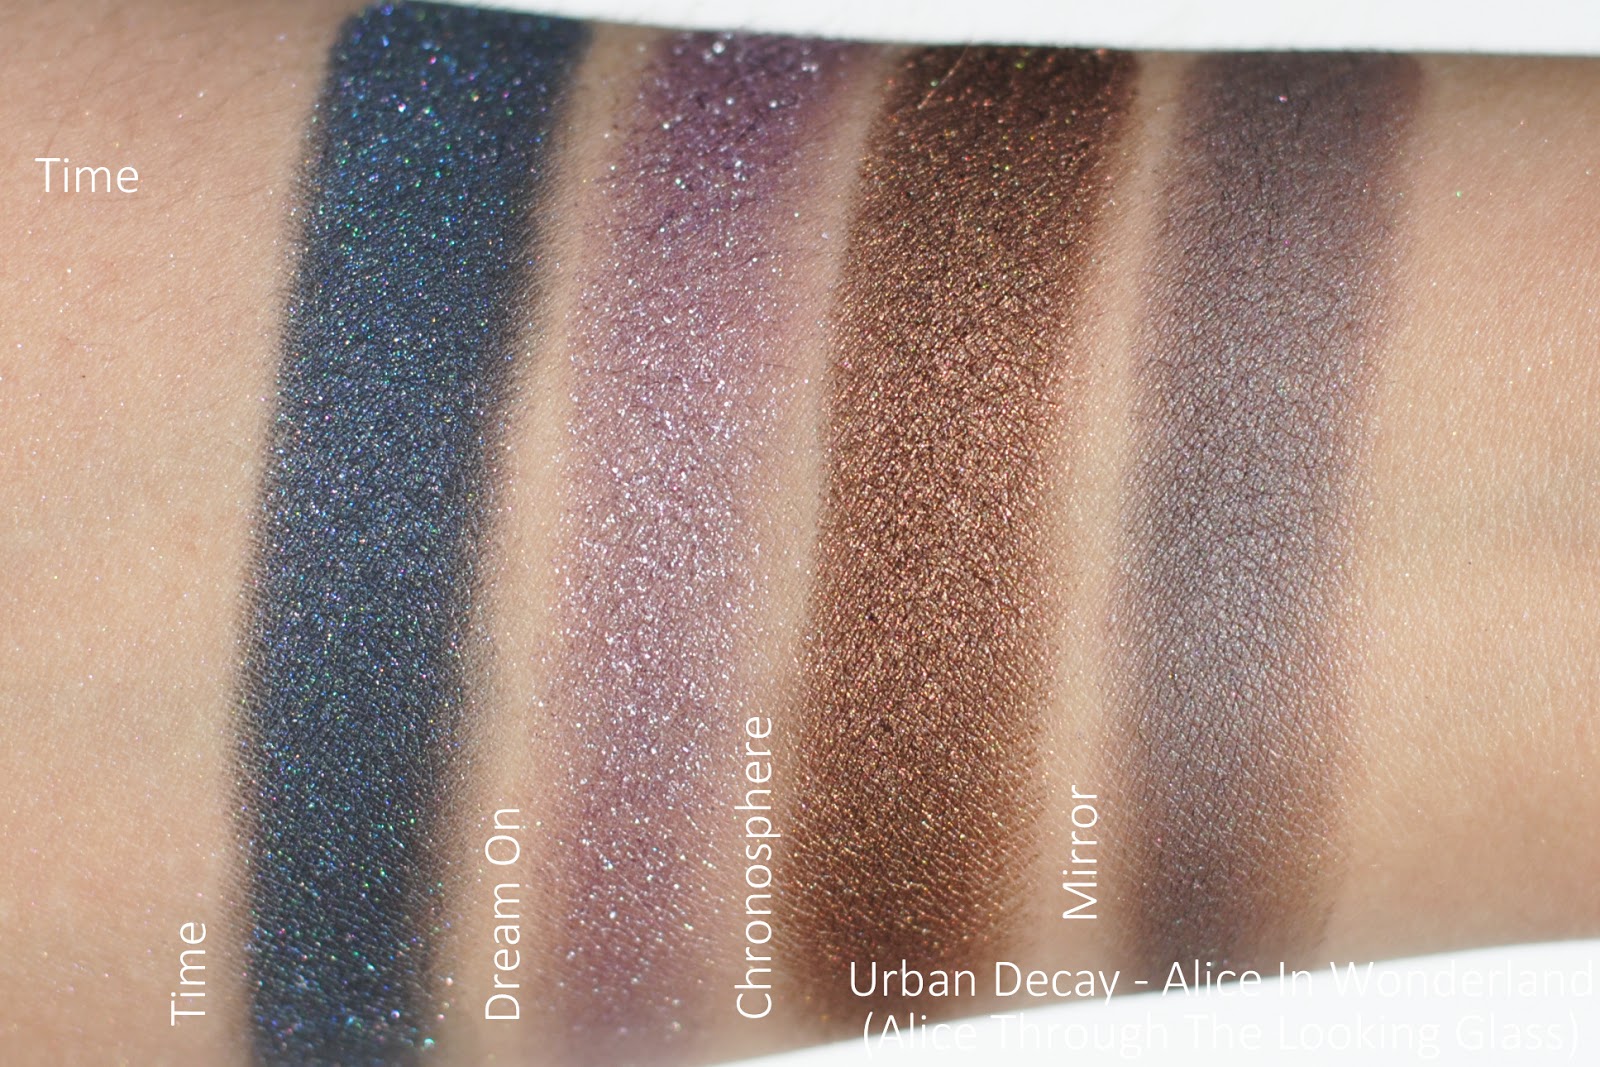 urban decay alice in wonderland alice through the looking glass swatches